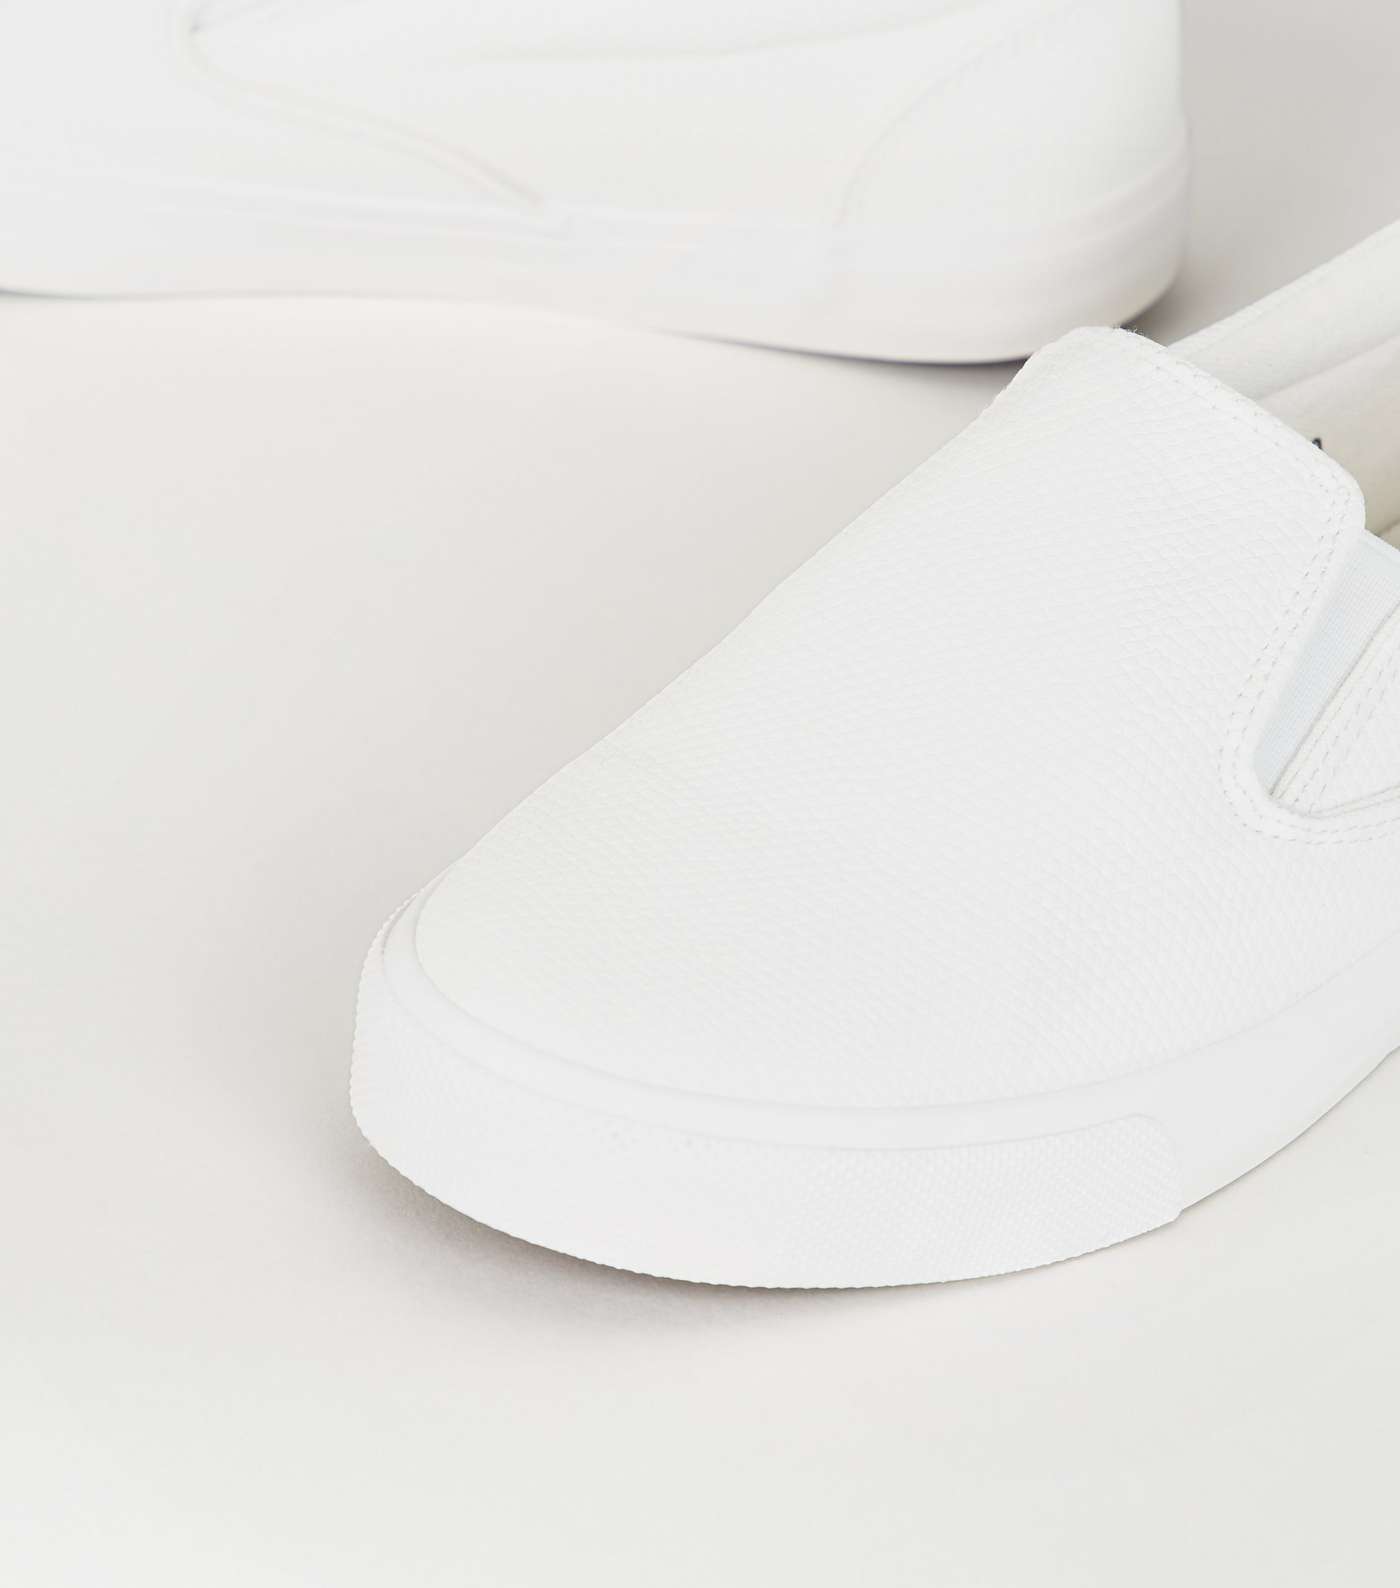 White Faux Snake Slip On Trainers Image 4